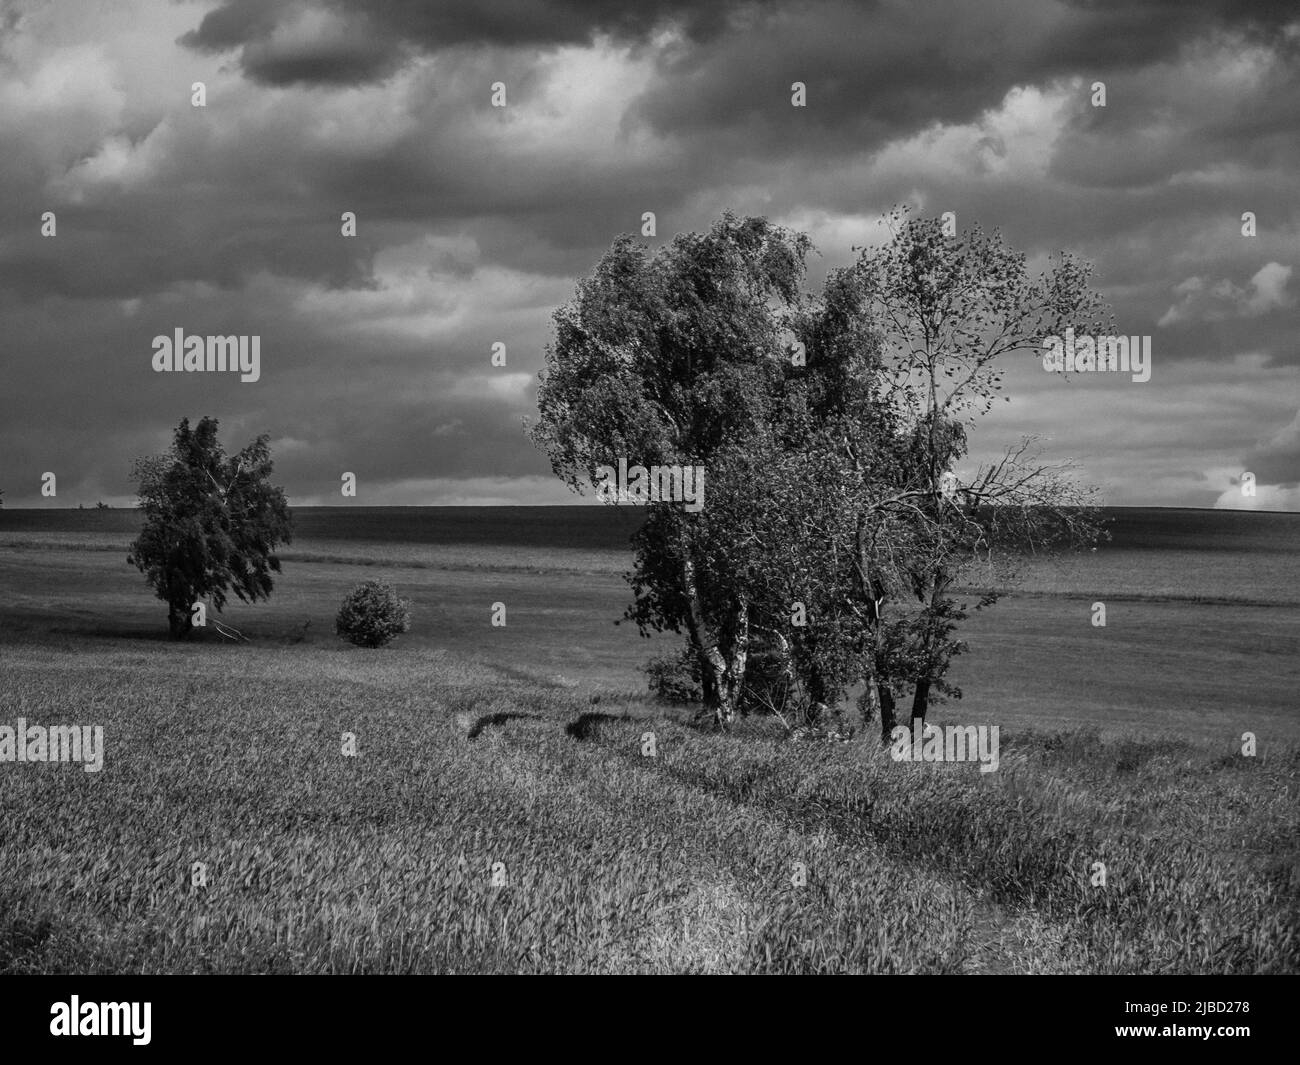 Bohemia Black and White Monochrome Landscape with Field and Trees in Czech Republic near Kasejovice Stock Photo